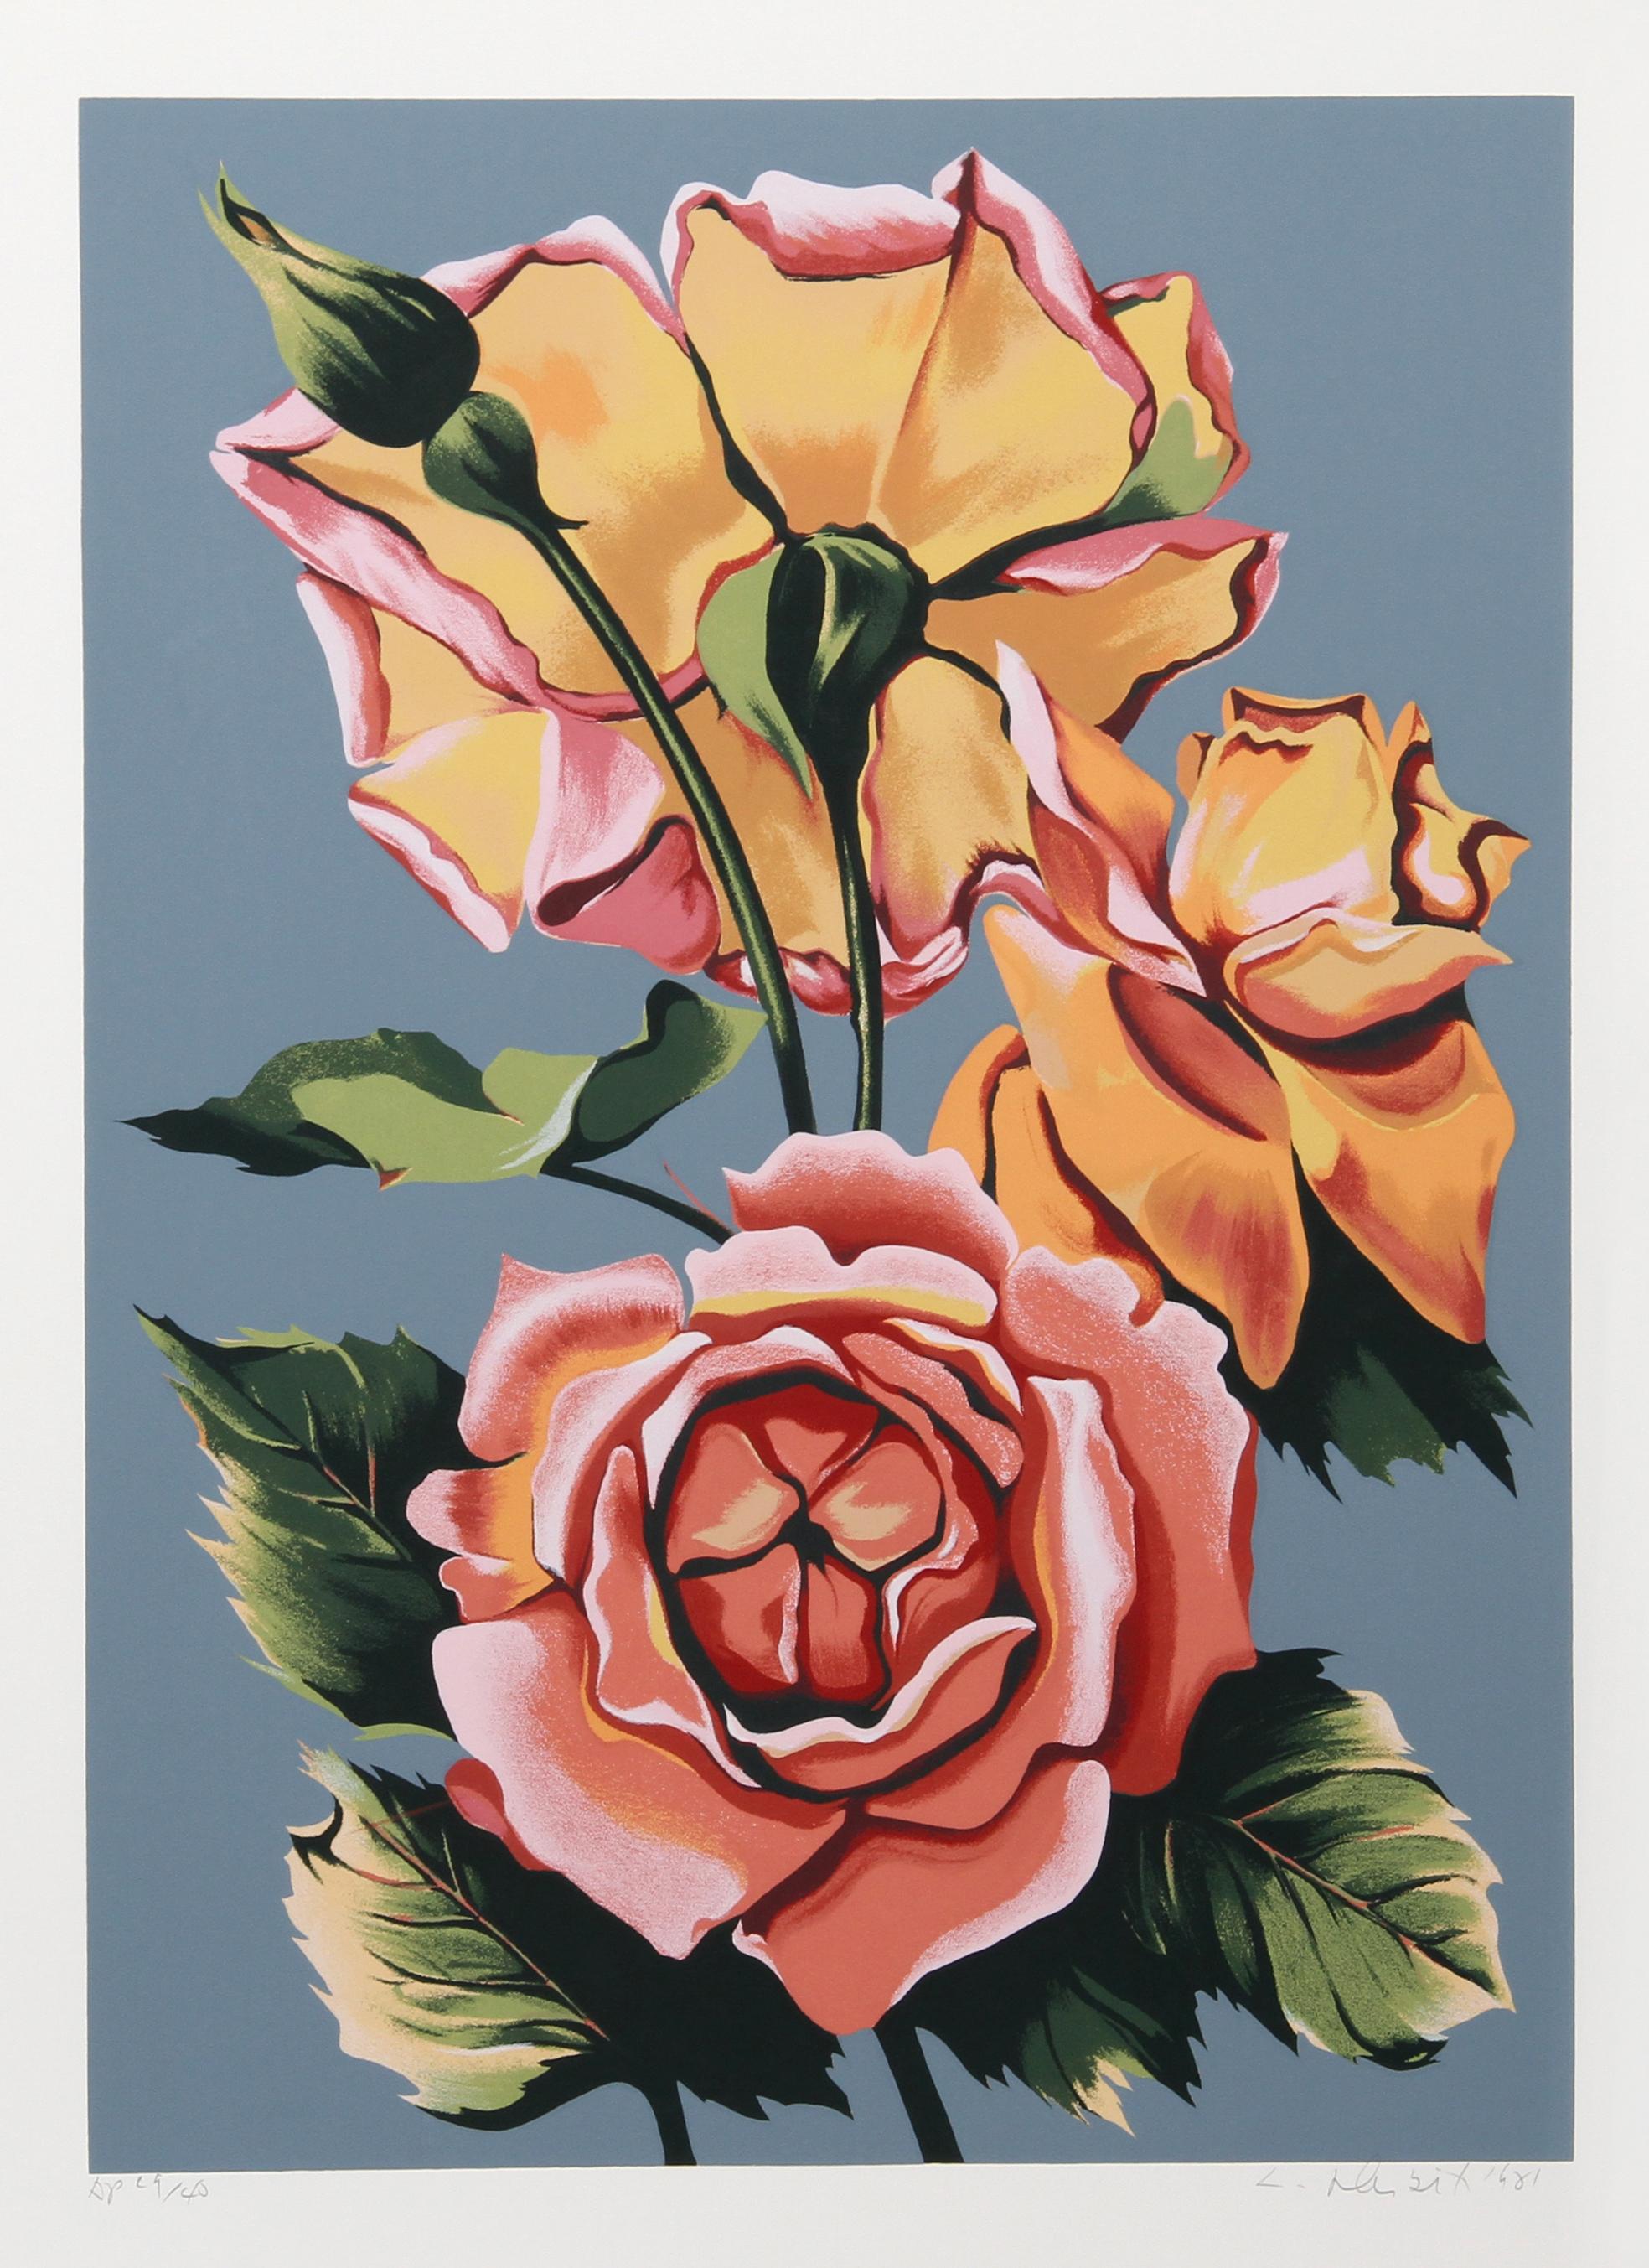 Artist: Lowell Blair Nesbitt, American (1933 - 1993)
Title: Roses
Year: 1981
Medium: Serigraph, signed and numbered in pencil
Edition: 200, AP 40
Image Size: 28 x 20 inches
Size: 35 x 26 in. (88.9 x 66.04 cm)